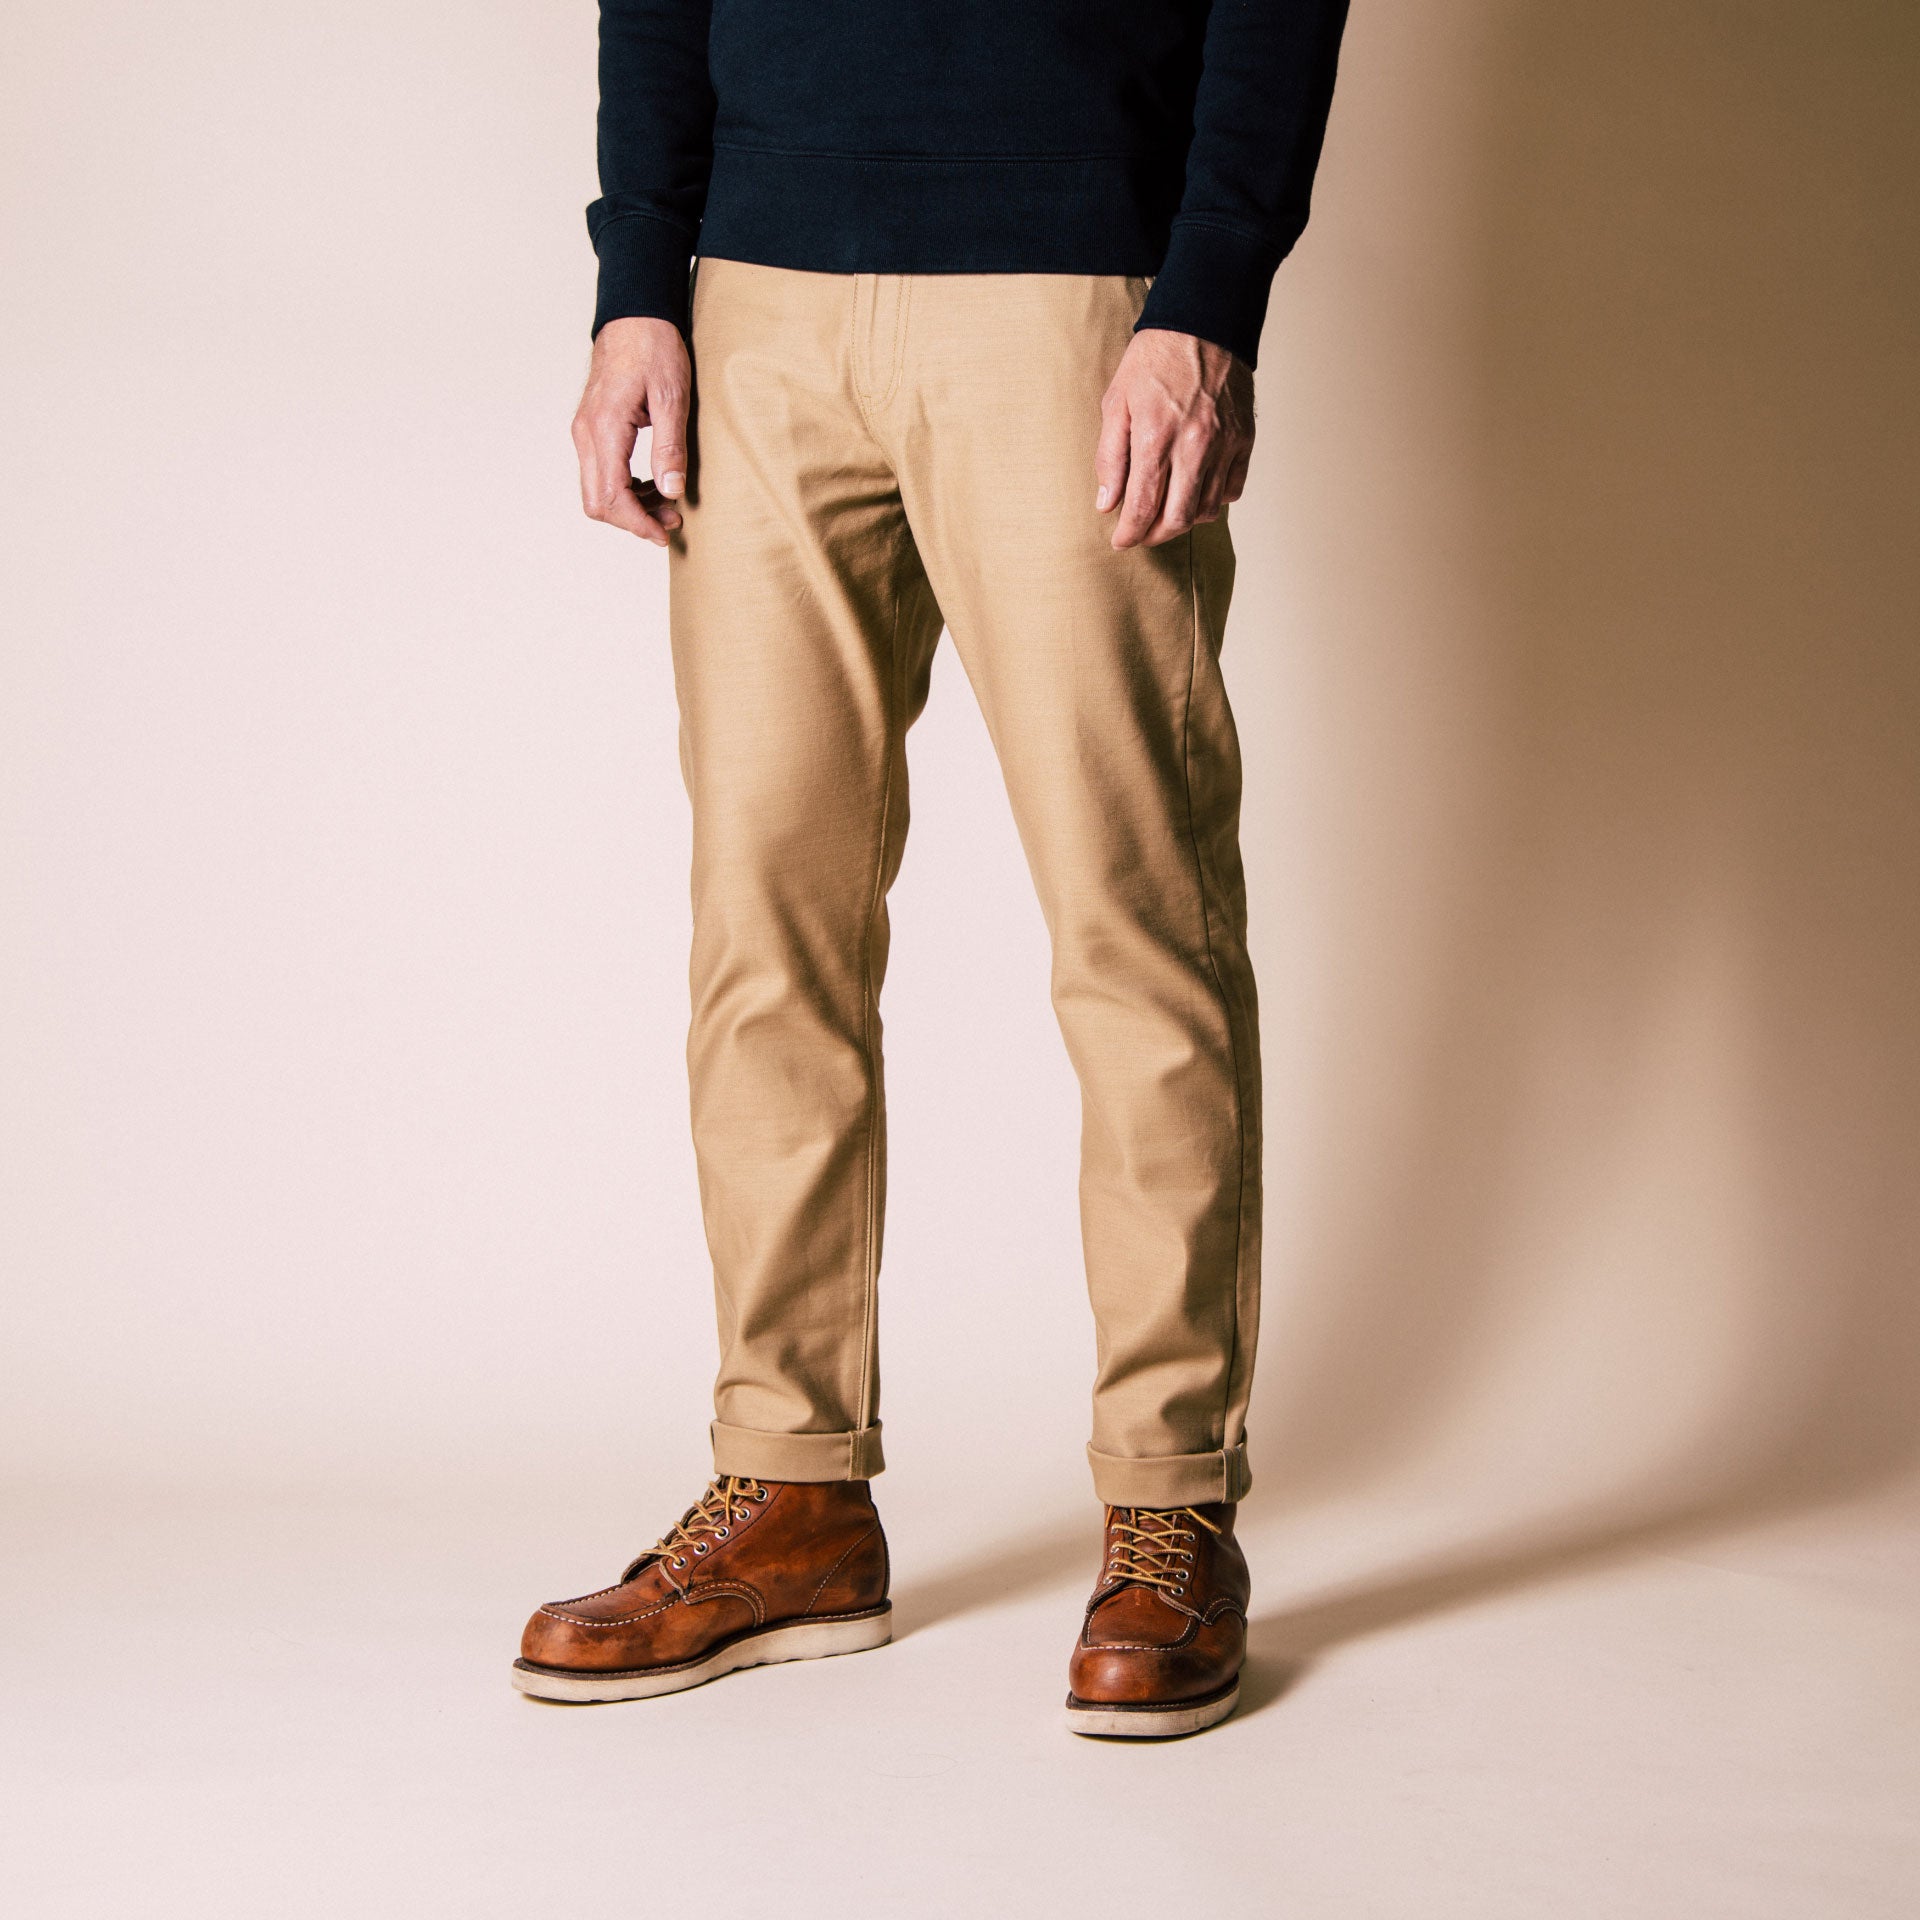 Mens Tapered Fit Pants Chinos Khakis  More  Dockers US